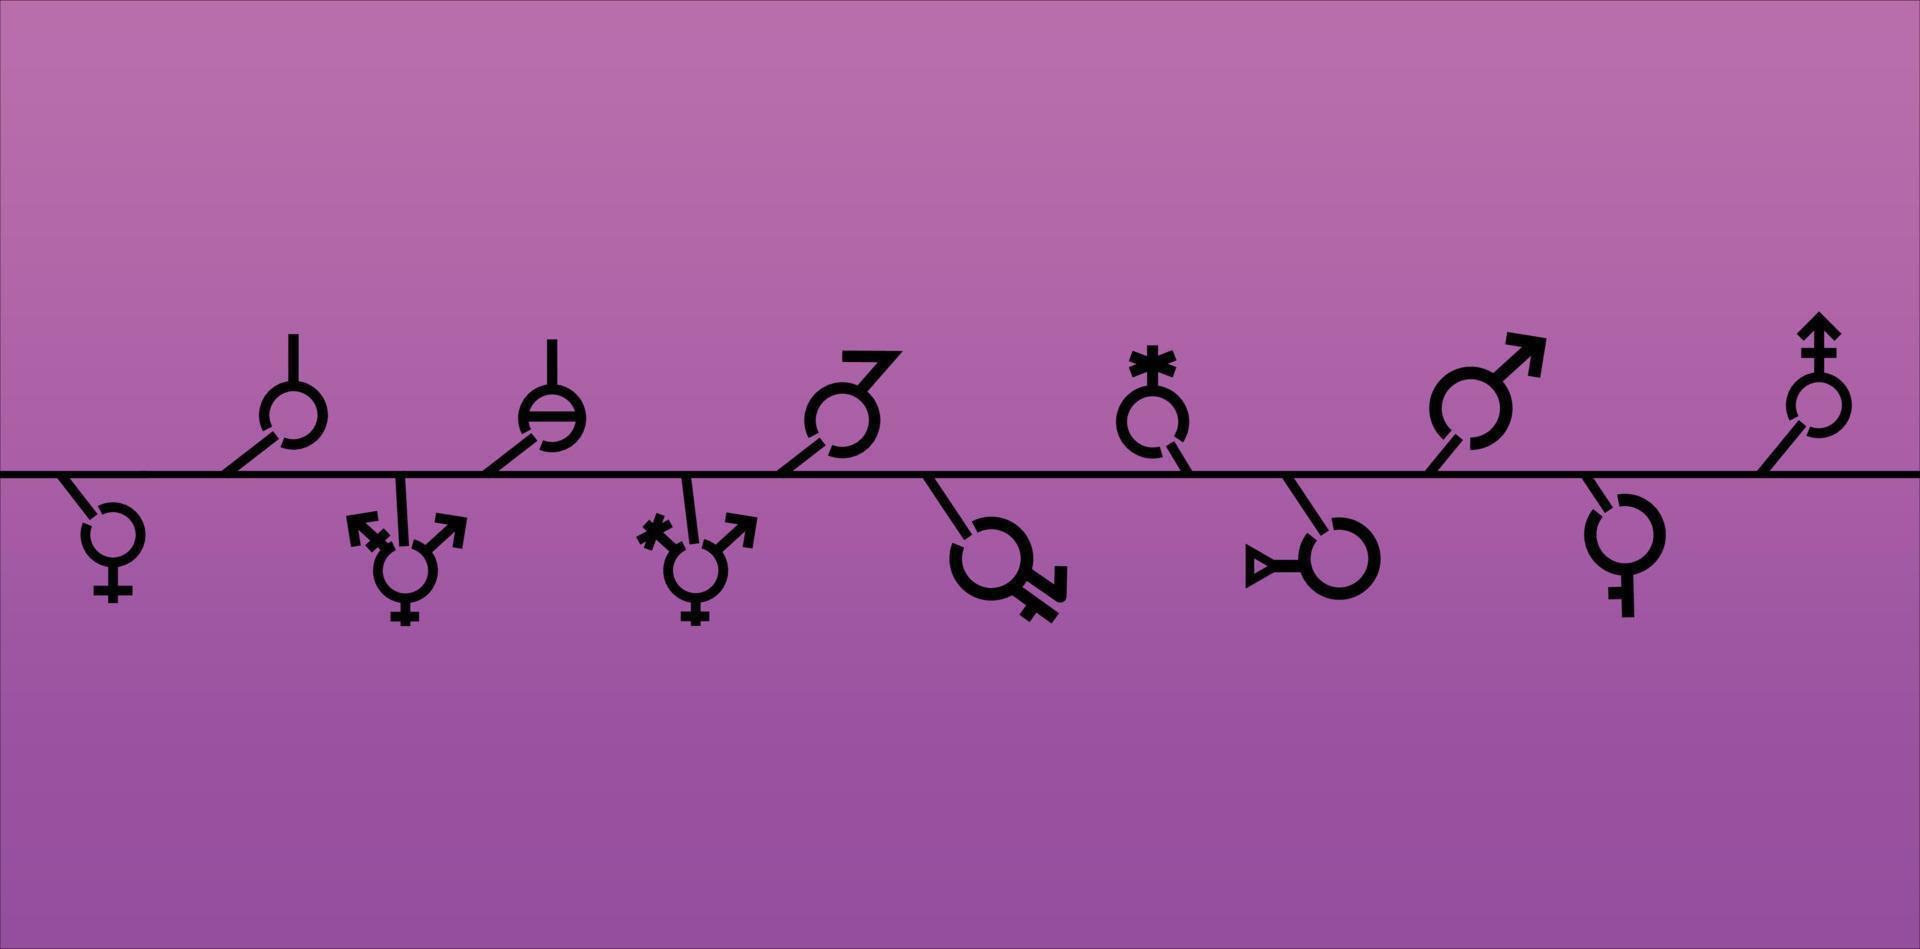 Genders icon template background. We are all the same. Lgbt, pride vector